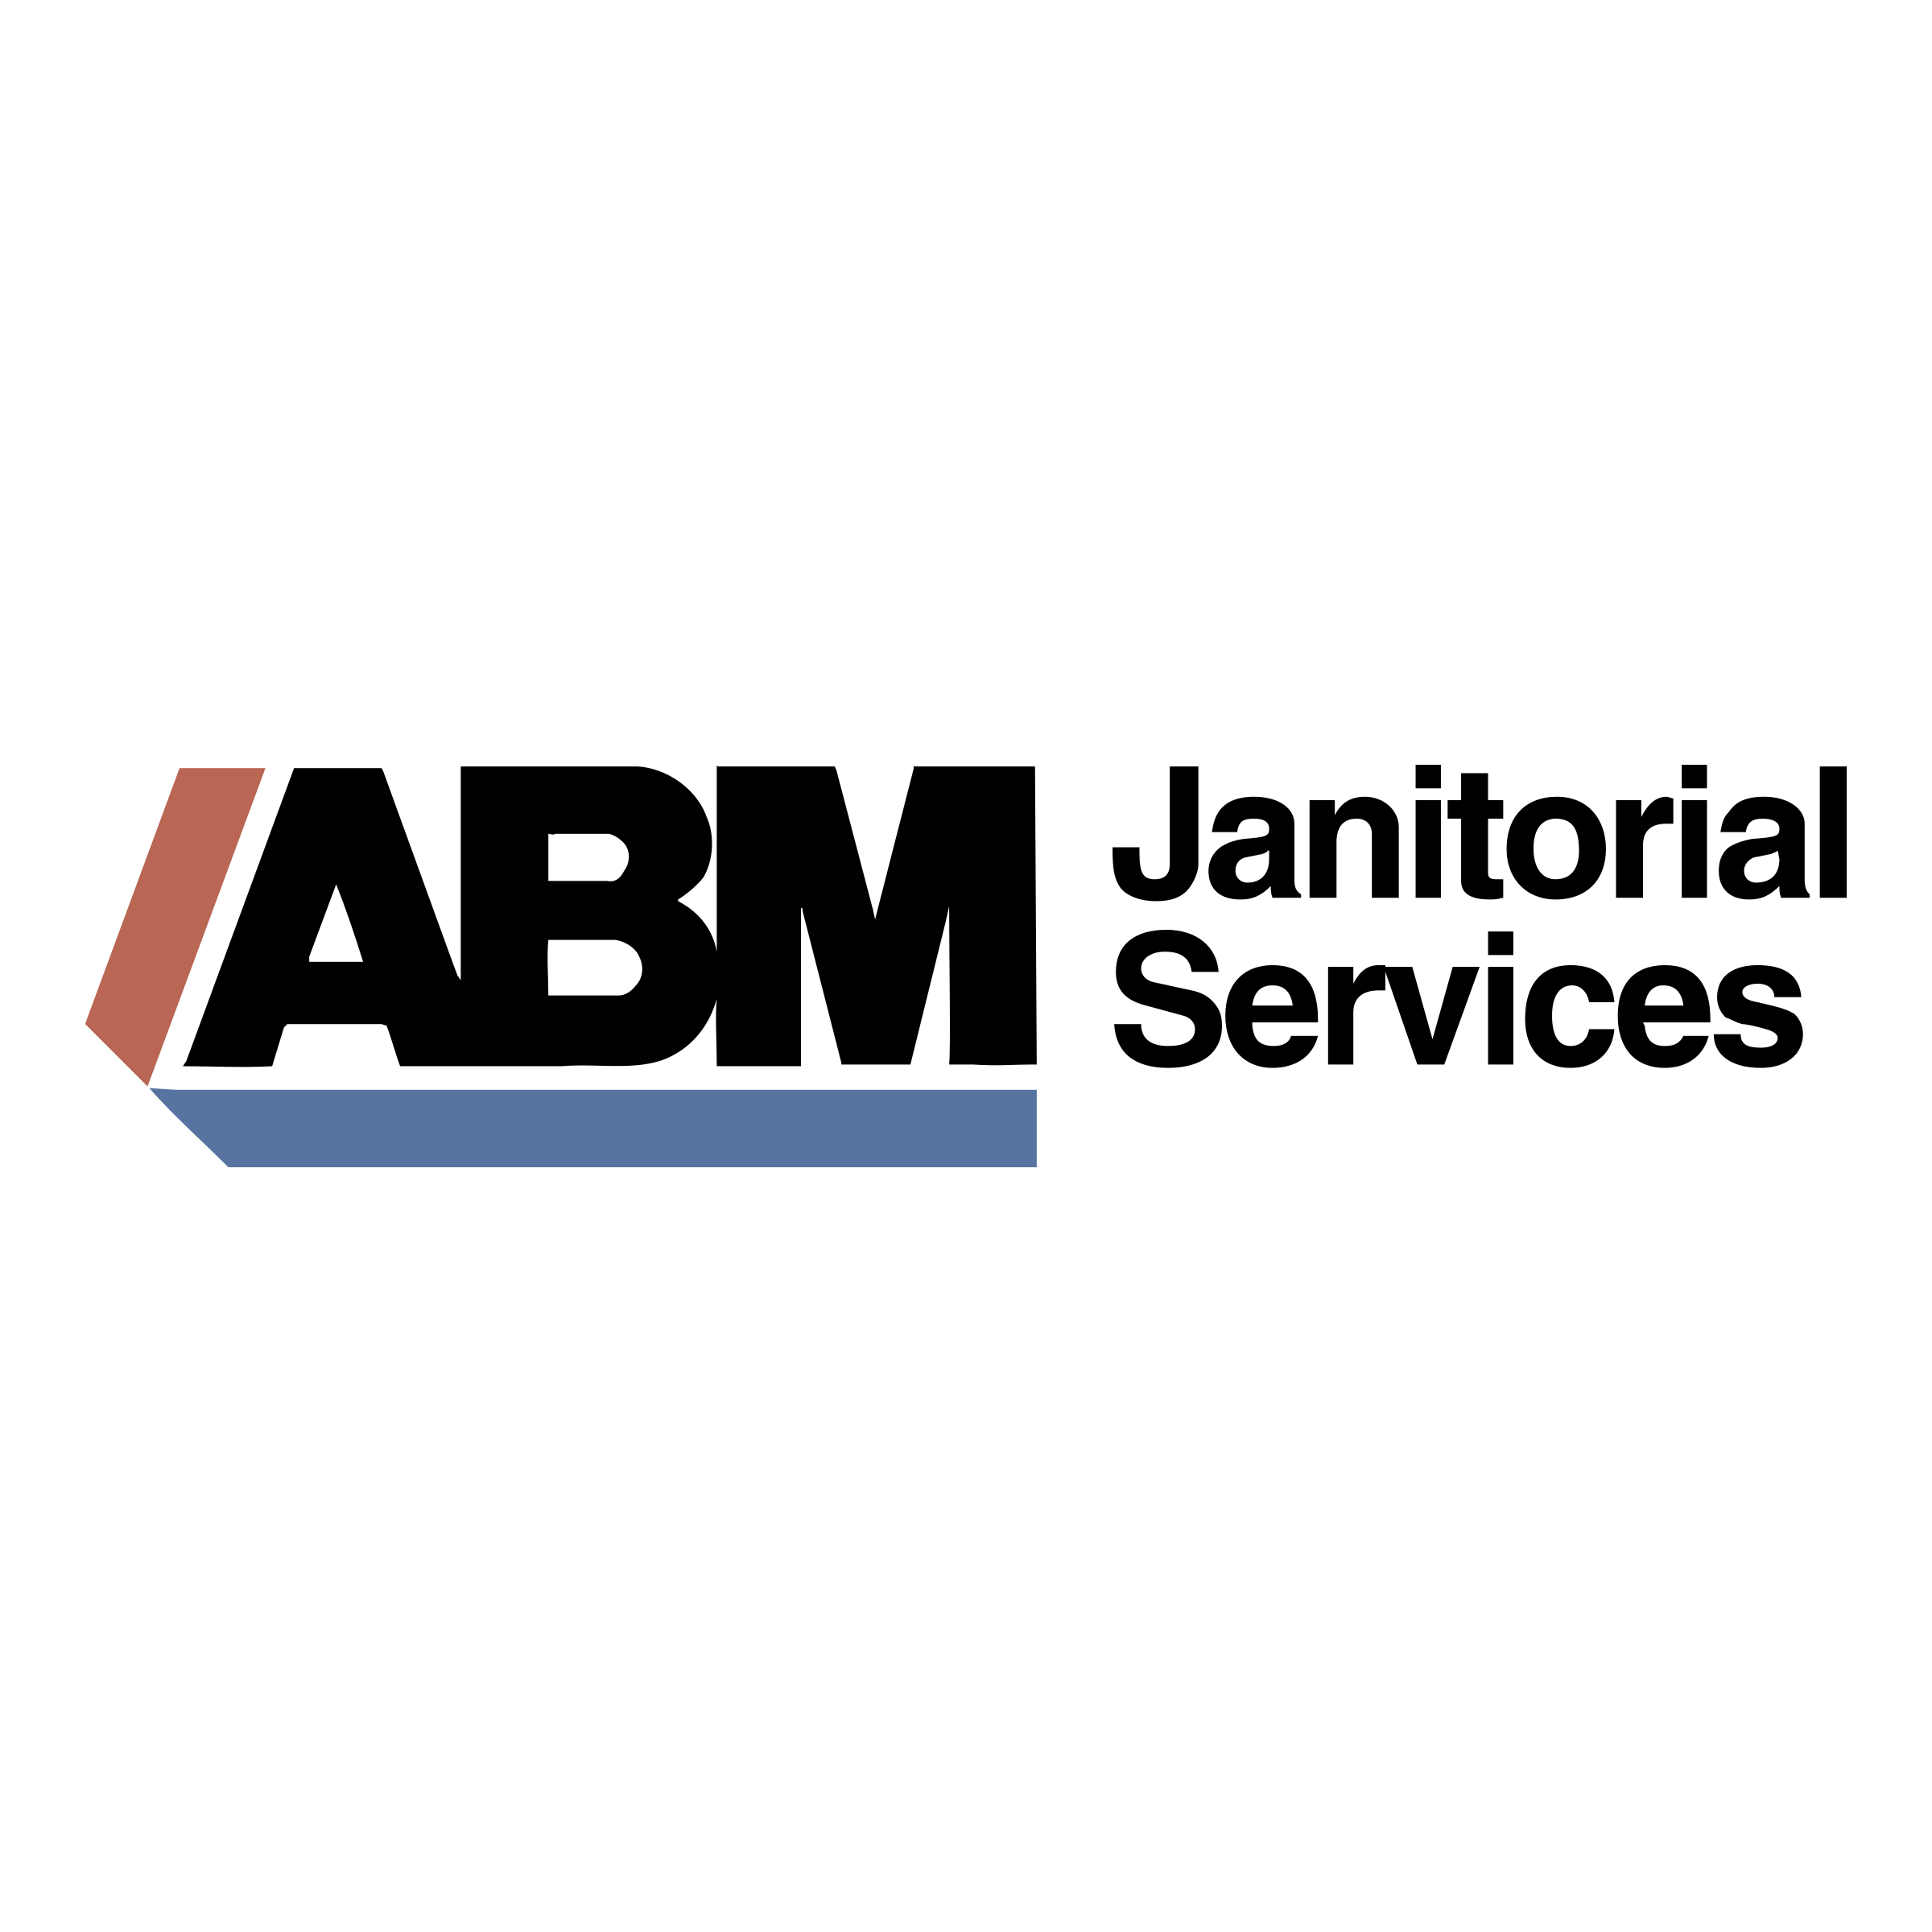 Janitorial Logo - ABM Janitorial Services Logo PNG Transparent & SVG Vector - Freebie ...